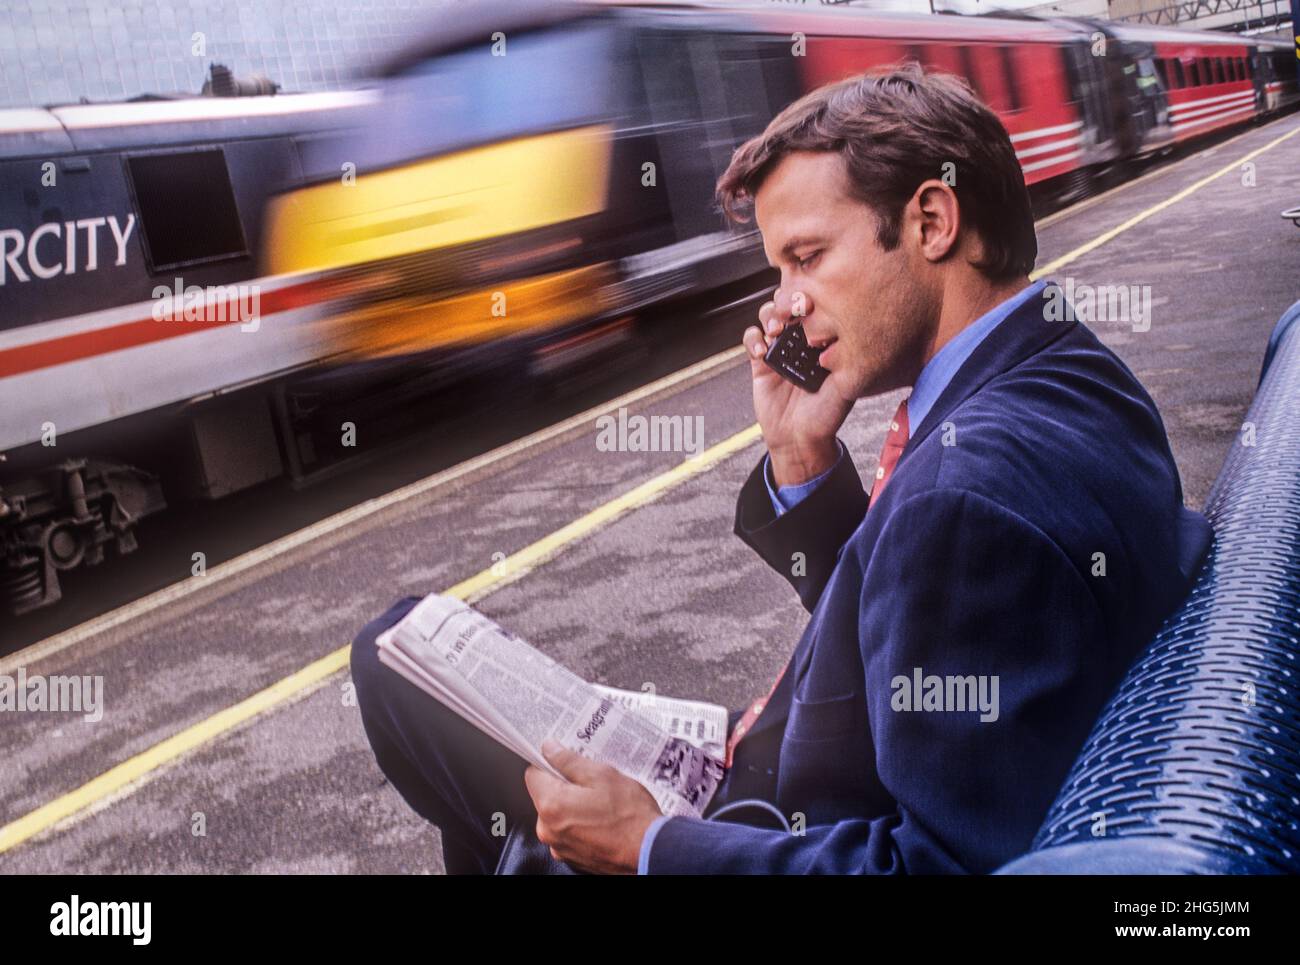 1990s Retro Travel Businessman London train blur, talking on mobile telephone seated on British railway station platform bench. Reading a newspaper and talking on latest 90s technology small Ericsson mobile cell telephone. InterCity Cross Country Virgin train passing with speed blur. Fashion style technology travel and transport in the 1990s Stock Photo